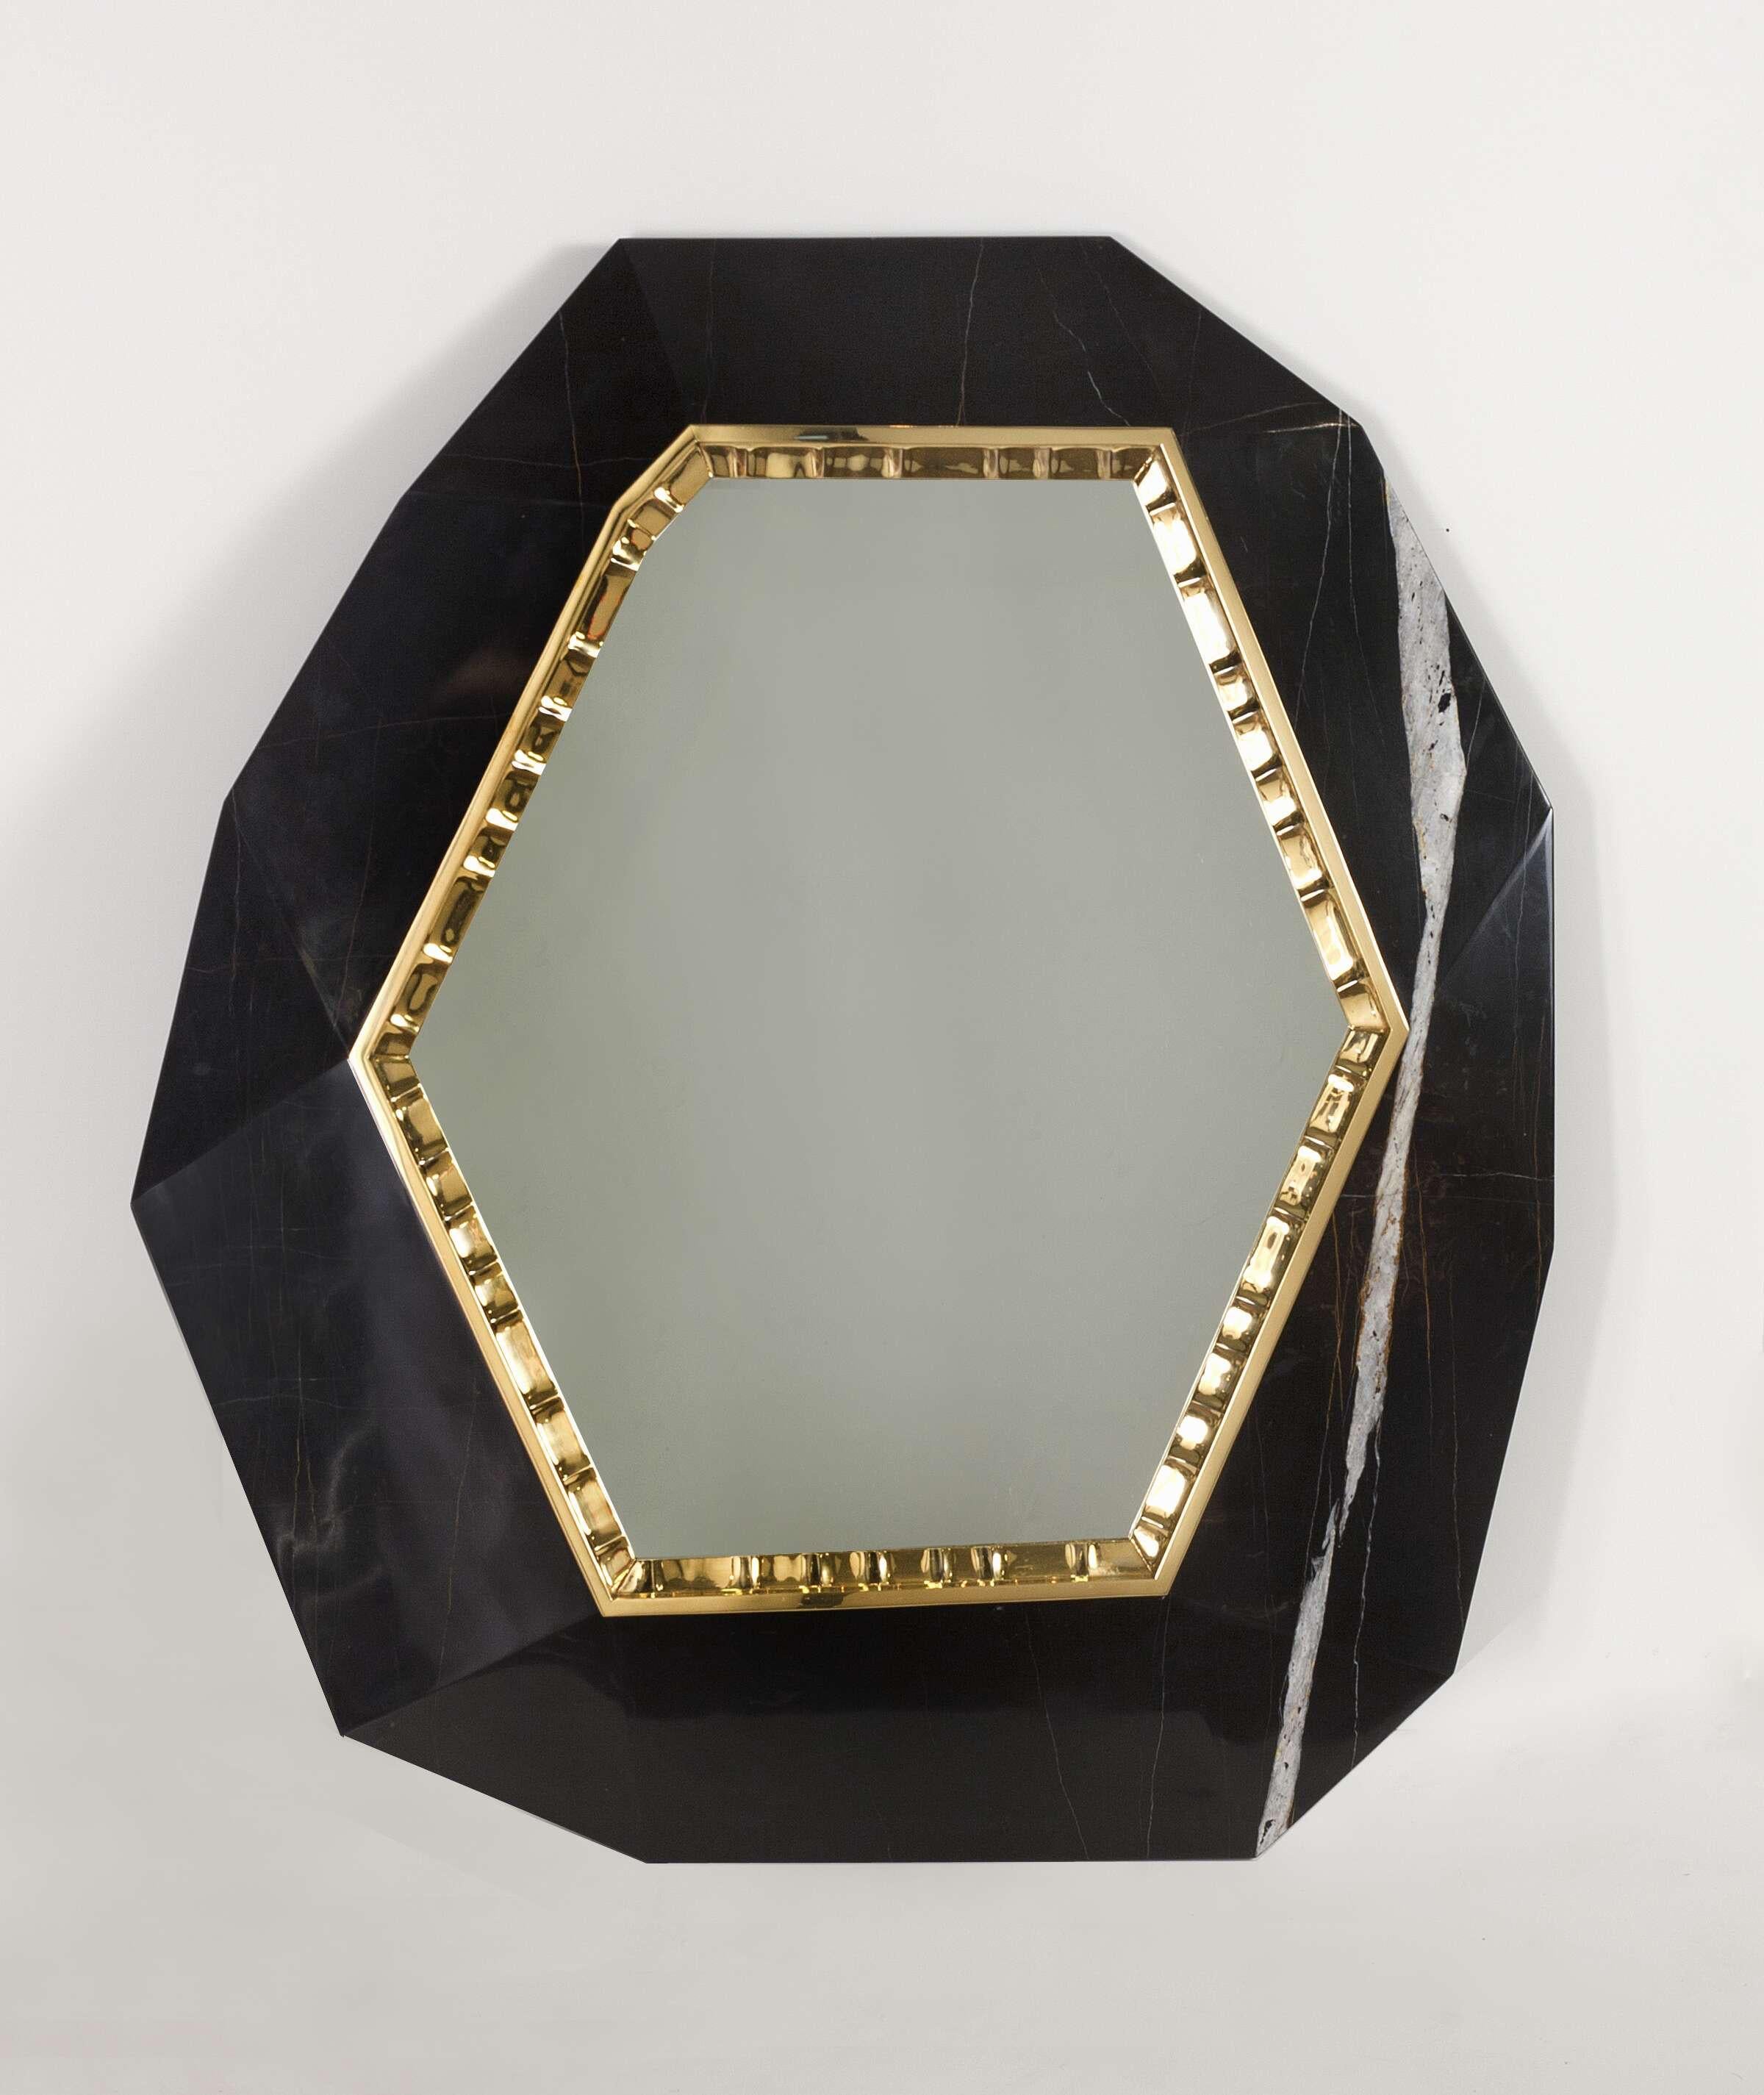 Lucy is a hexagonal mirror set, like a jewel, in a facetted plaque (either of noir doré marble, brown Emperador marble, or polished Royal Oak), and bordered by thin ornamental patinated bronze trim.

Edition of 20.
Stamped: Achille Salvagni